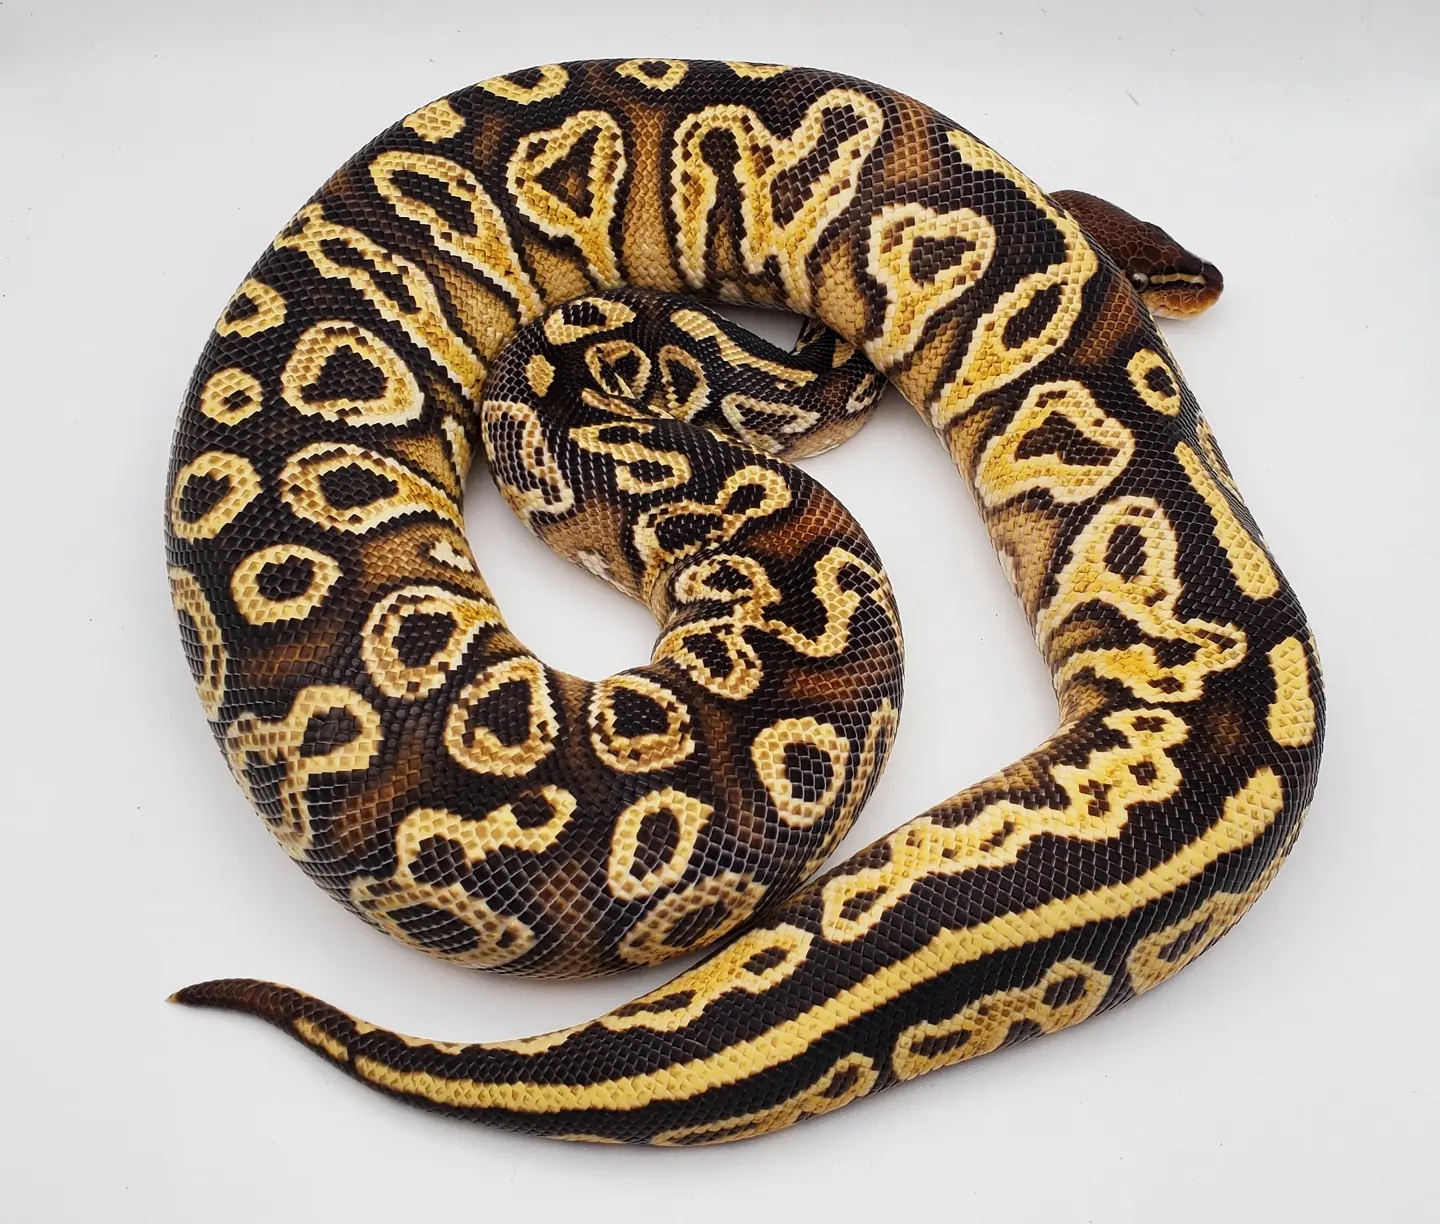 Blitzkrieg OD YB Special Ball Python by Double D Pythons